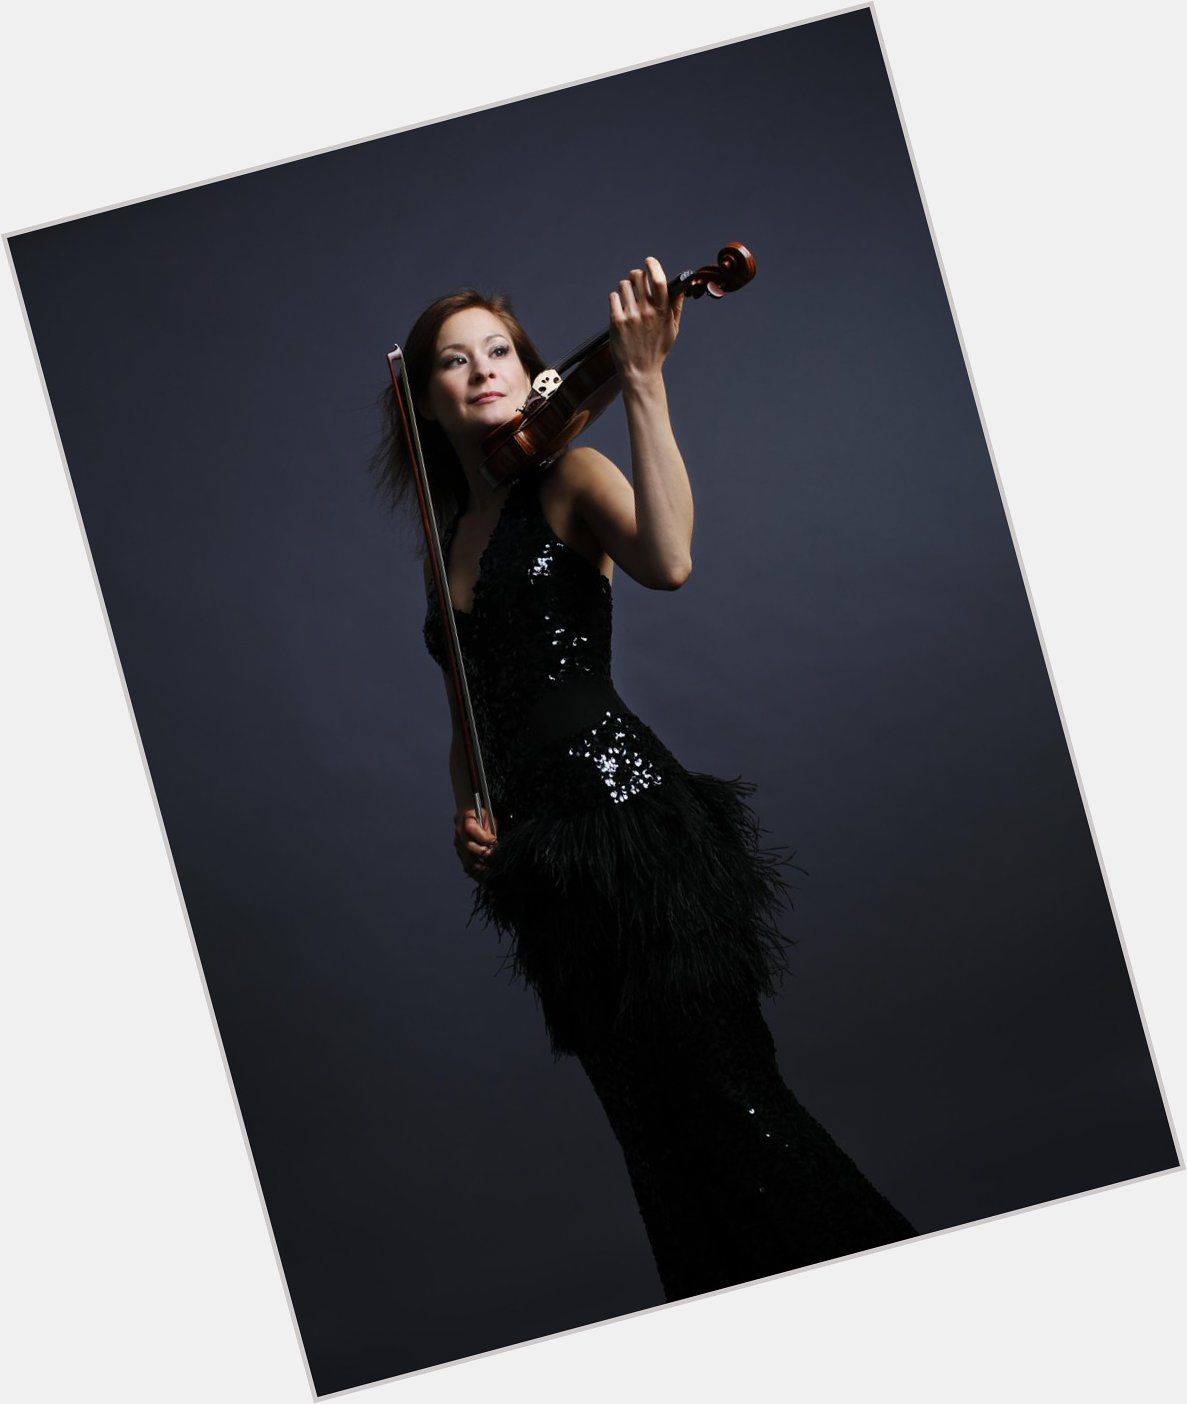 Happy Birthday to the talented soloist, Arabella Steinbacher!

We celebrate with our disc.:  